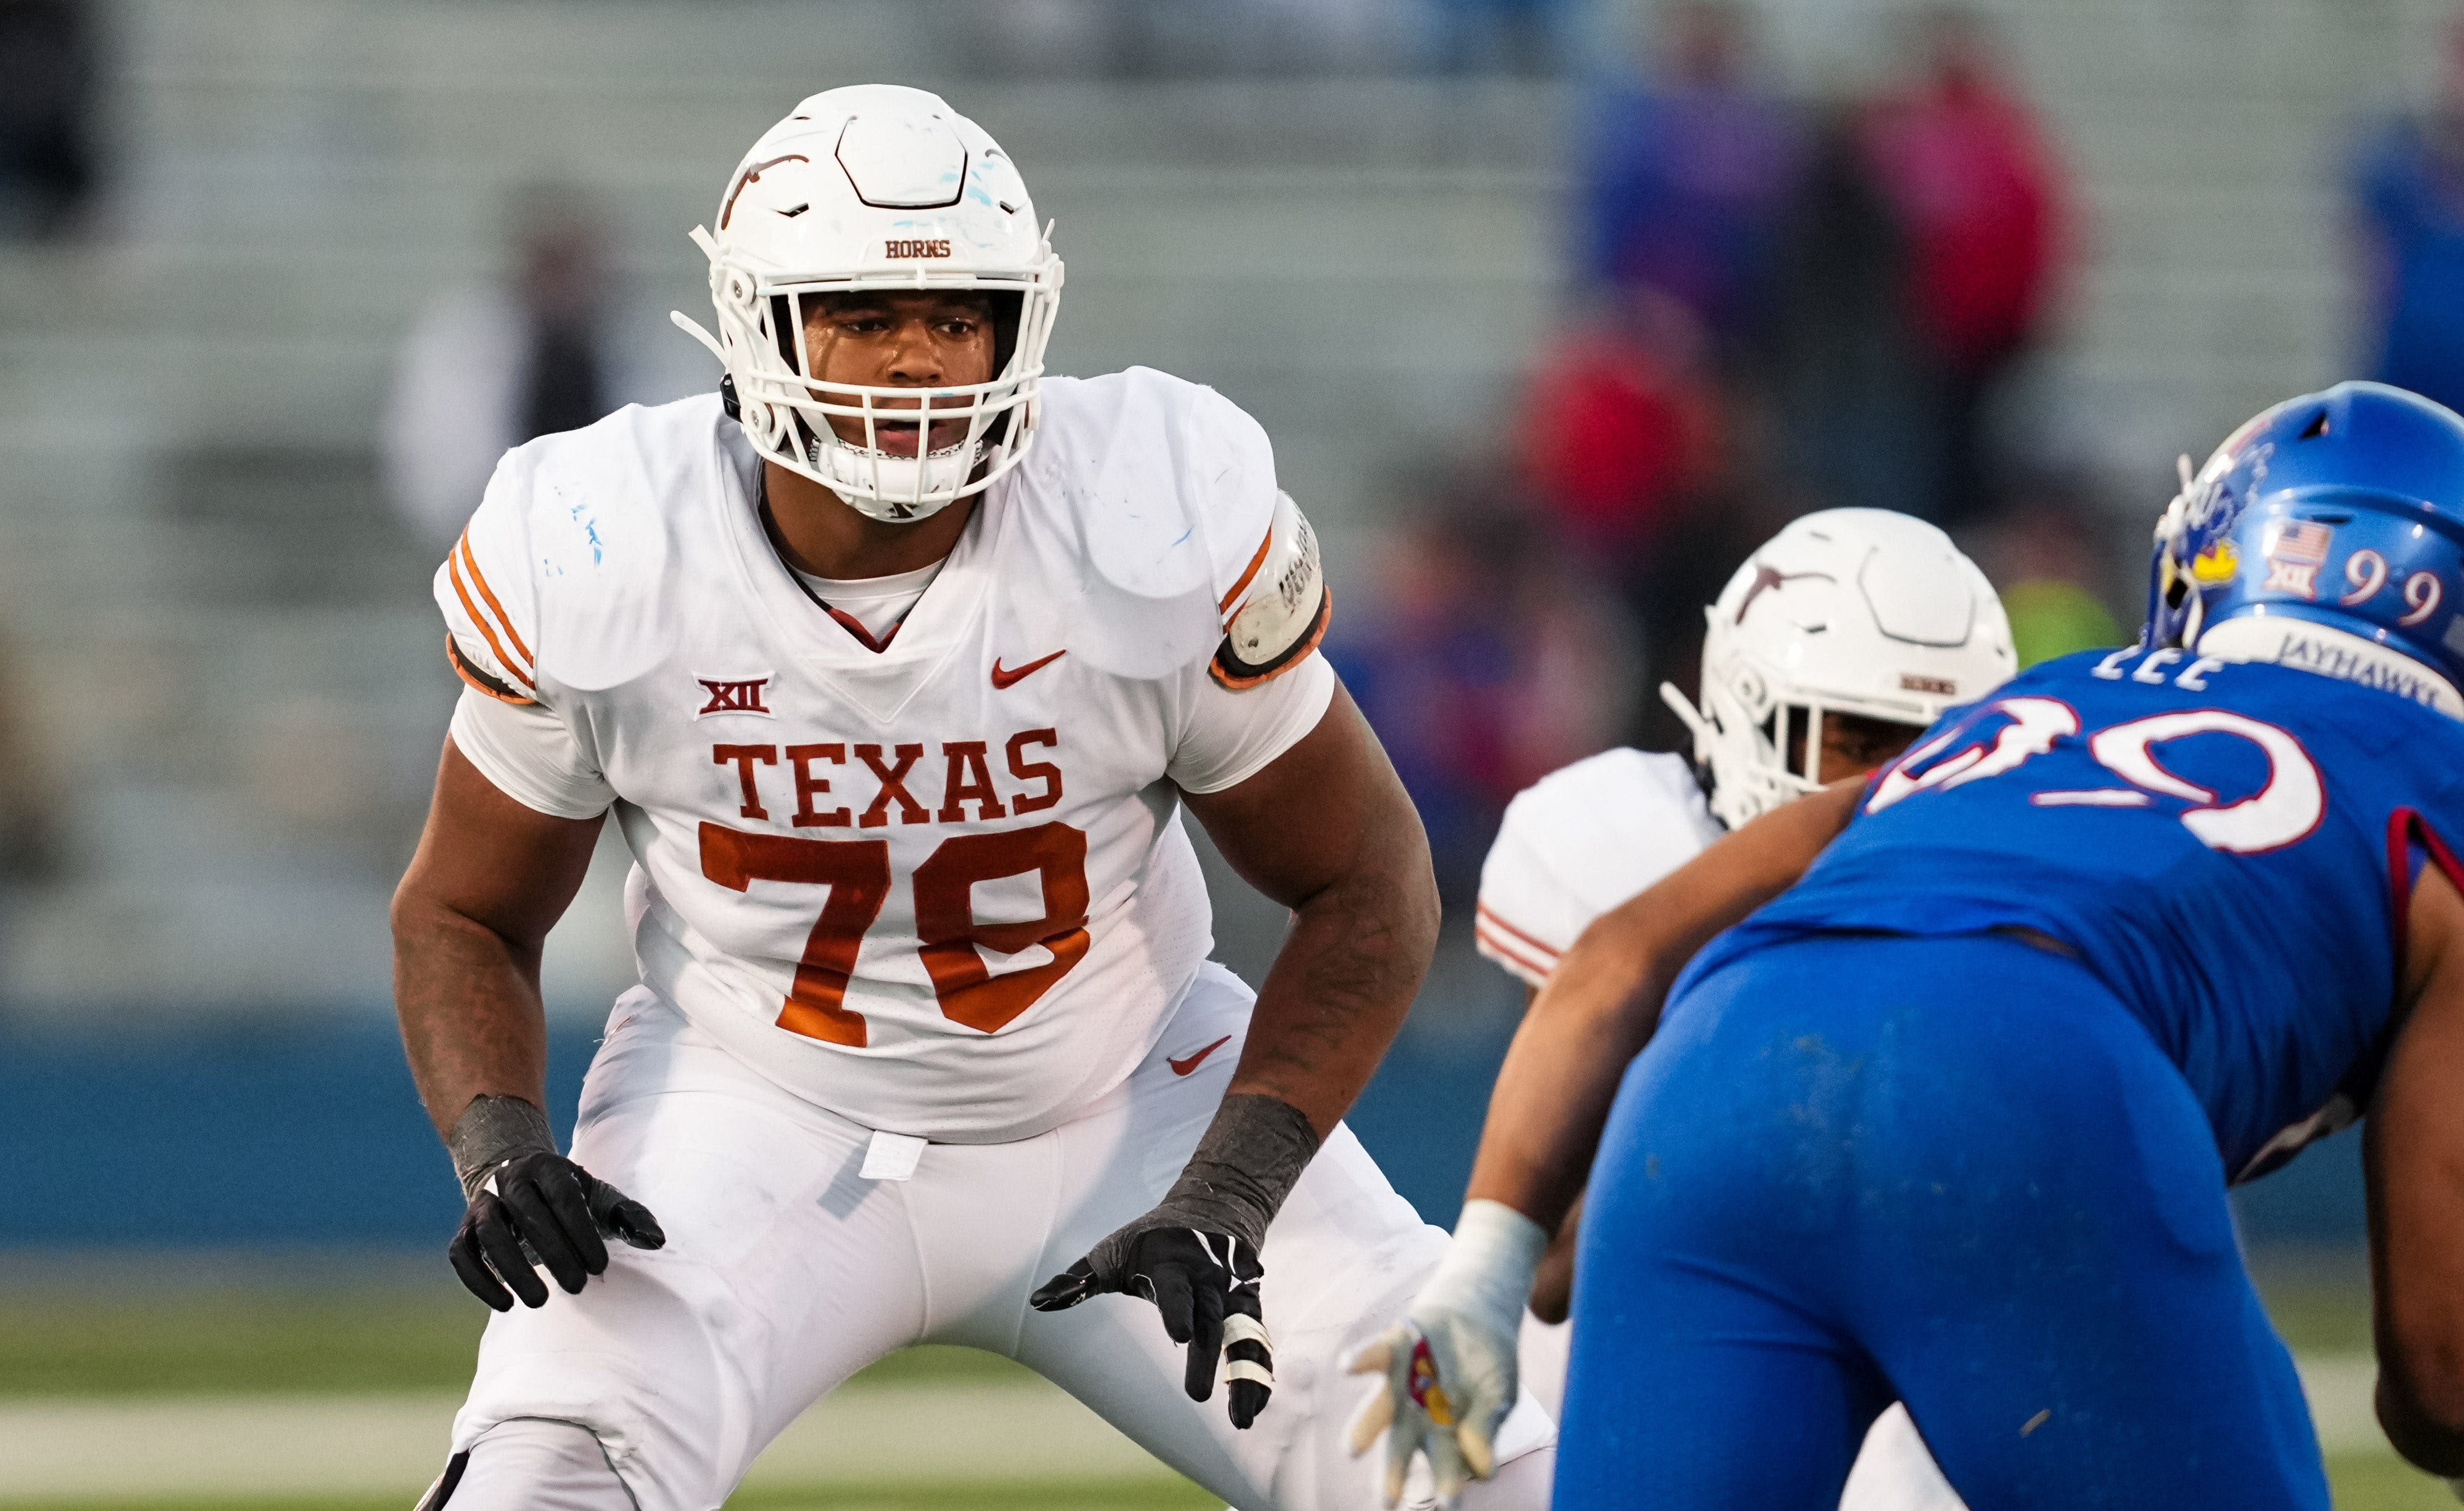 Best of the SEC: How the Texas offensive line stands as we rank all 16 conference teams